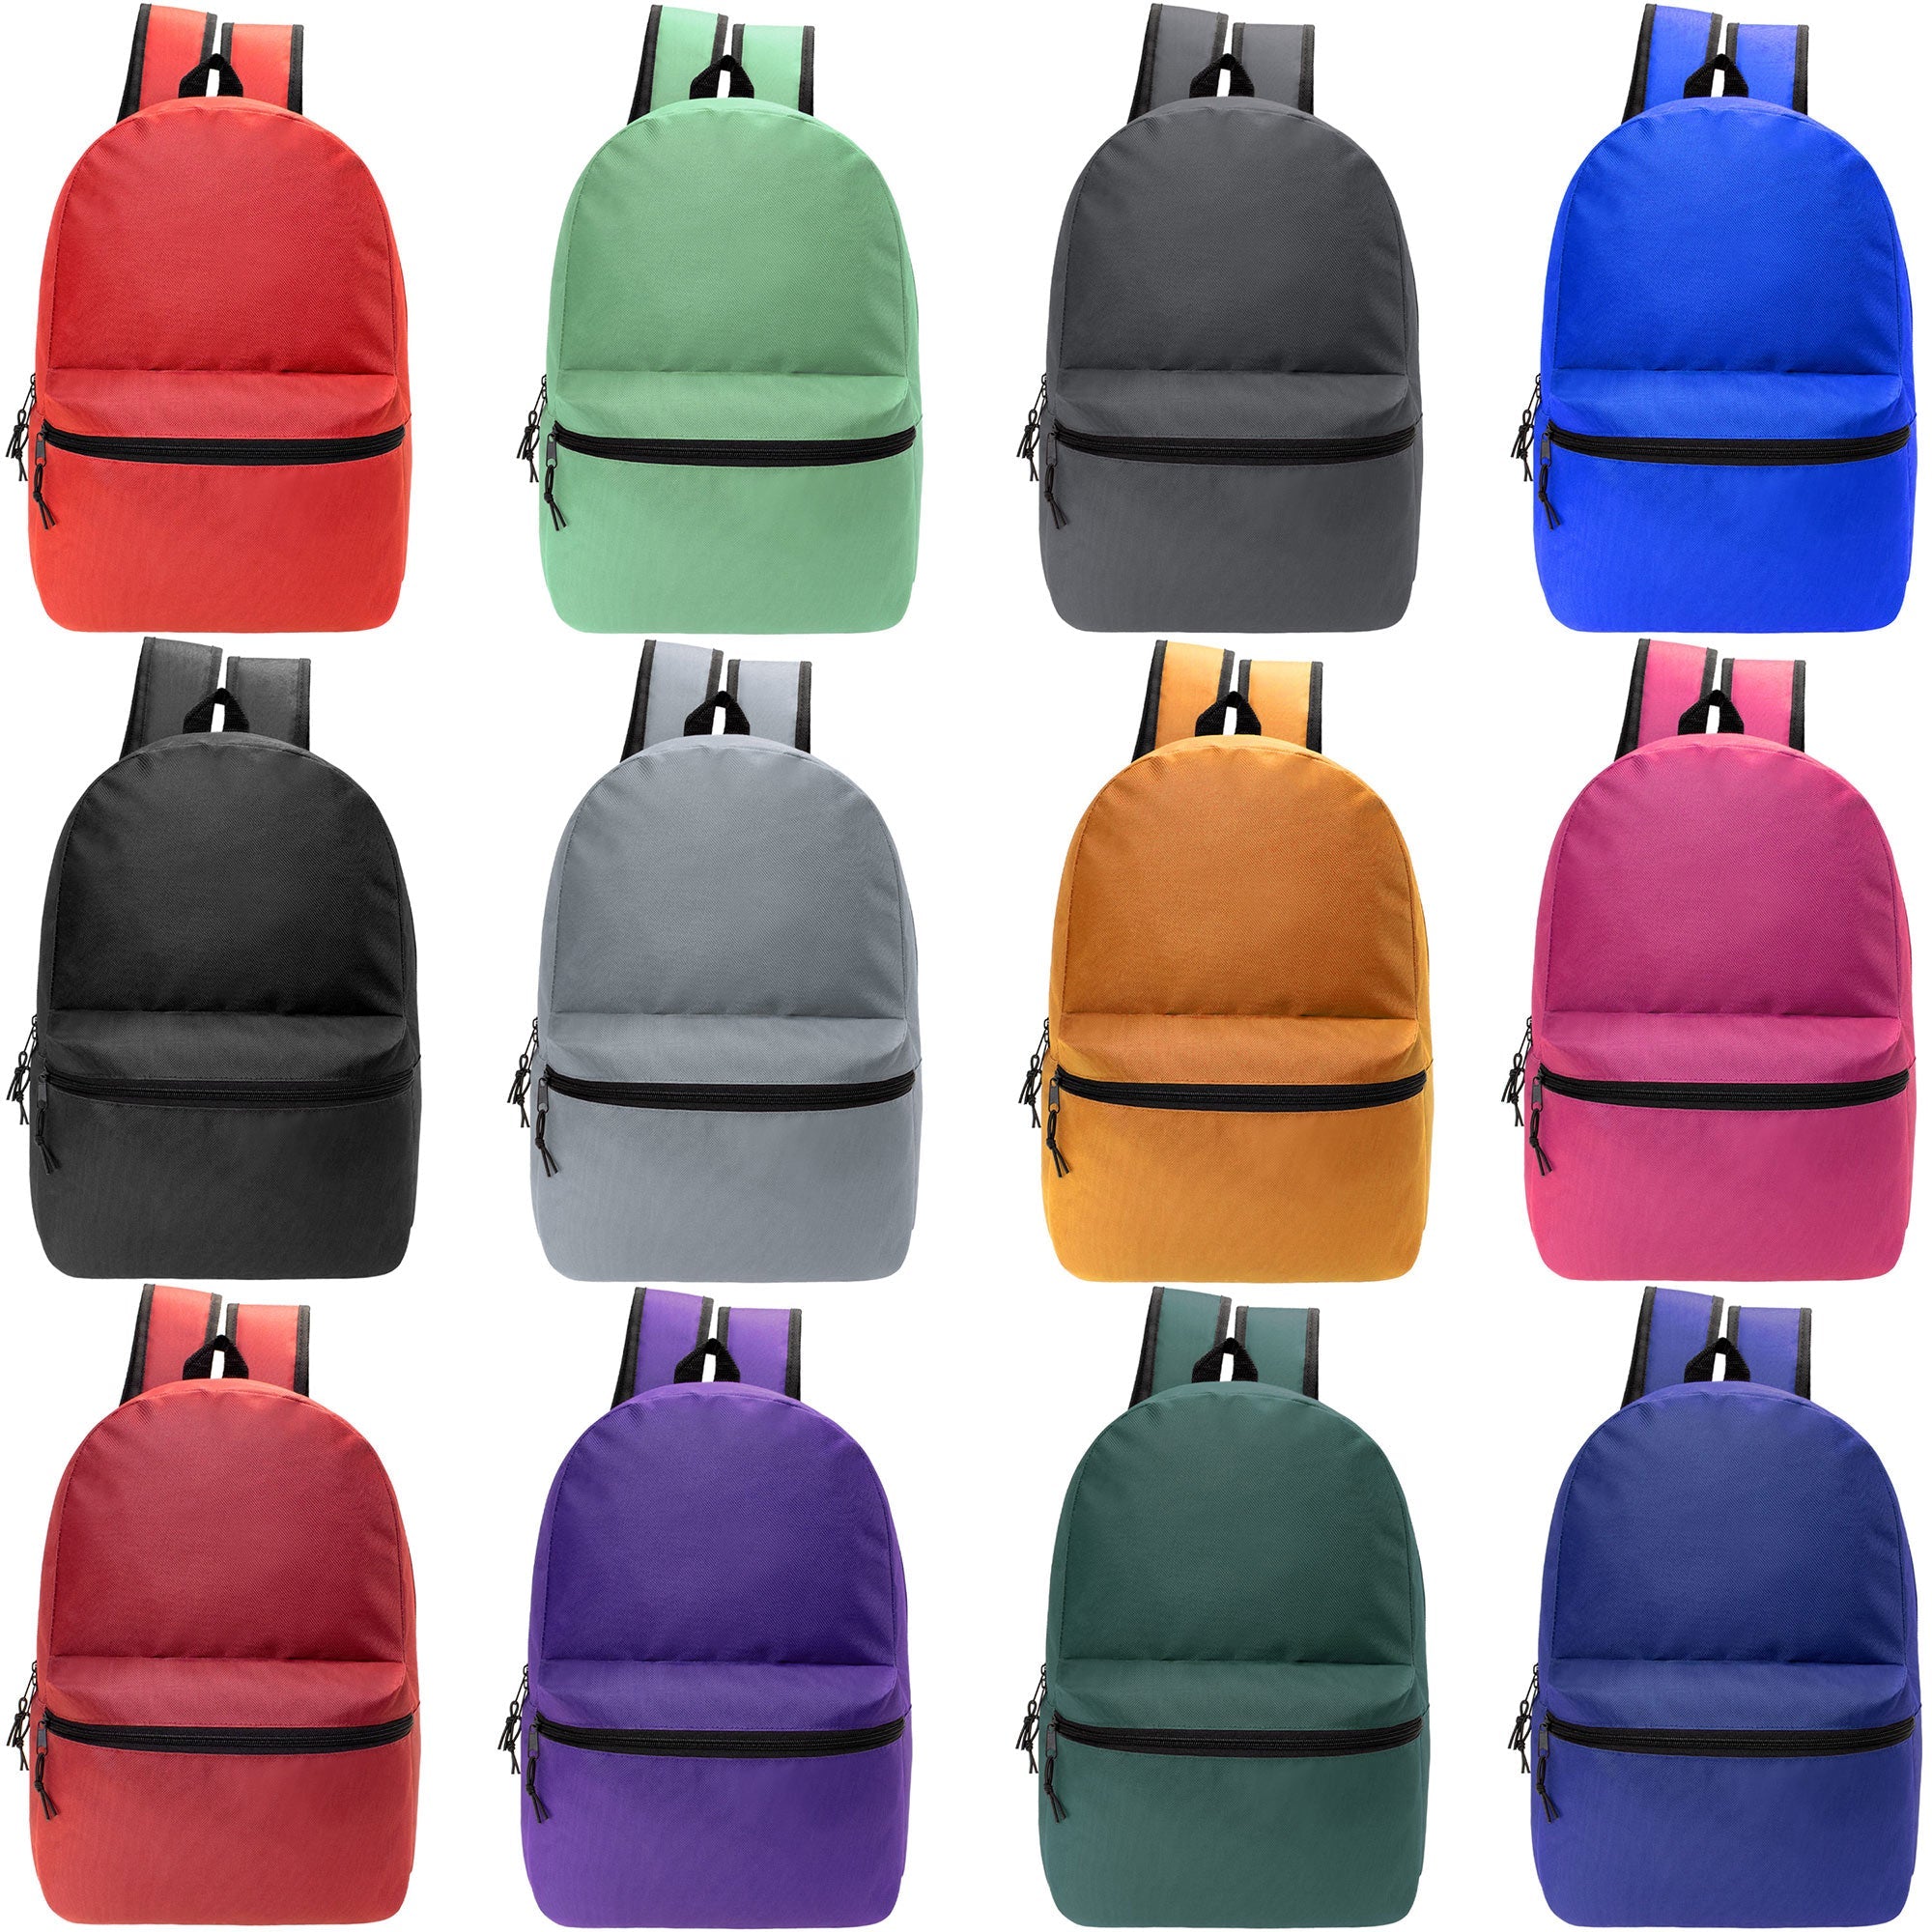 18.5" Basic Blank Back to School Wholesale Backpack in 12 Colors - Bulk Case of 24